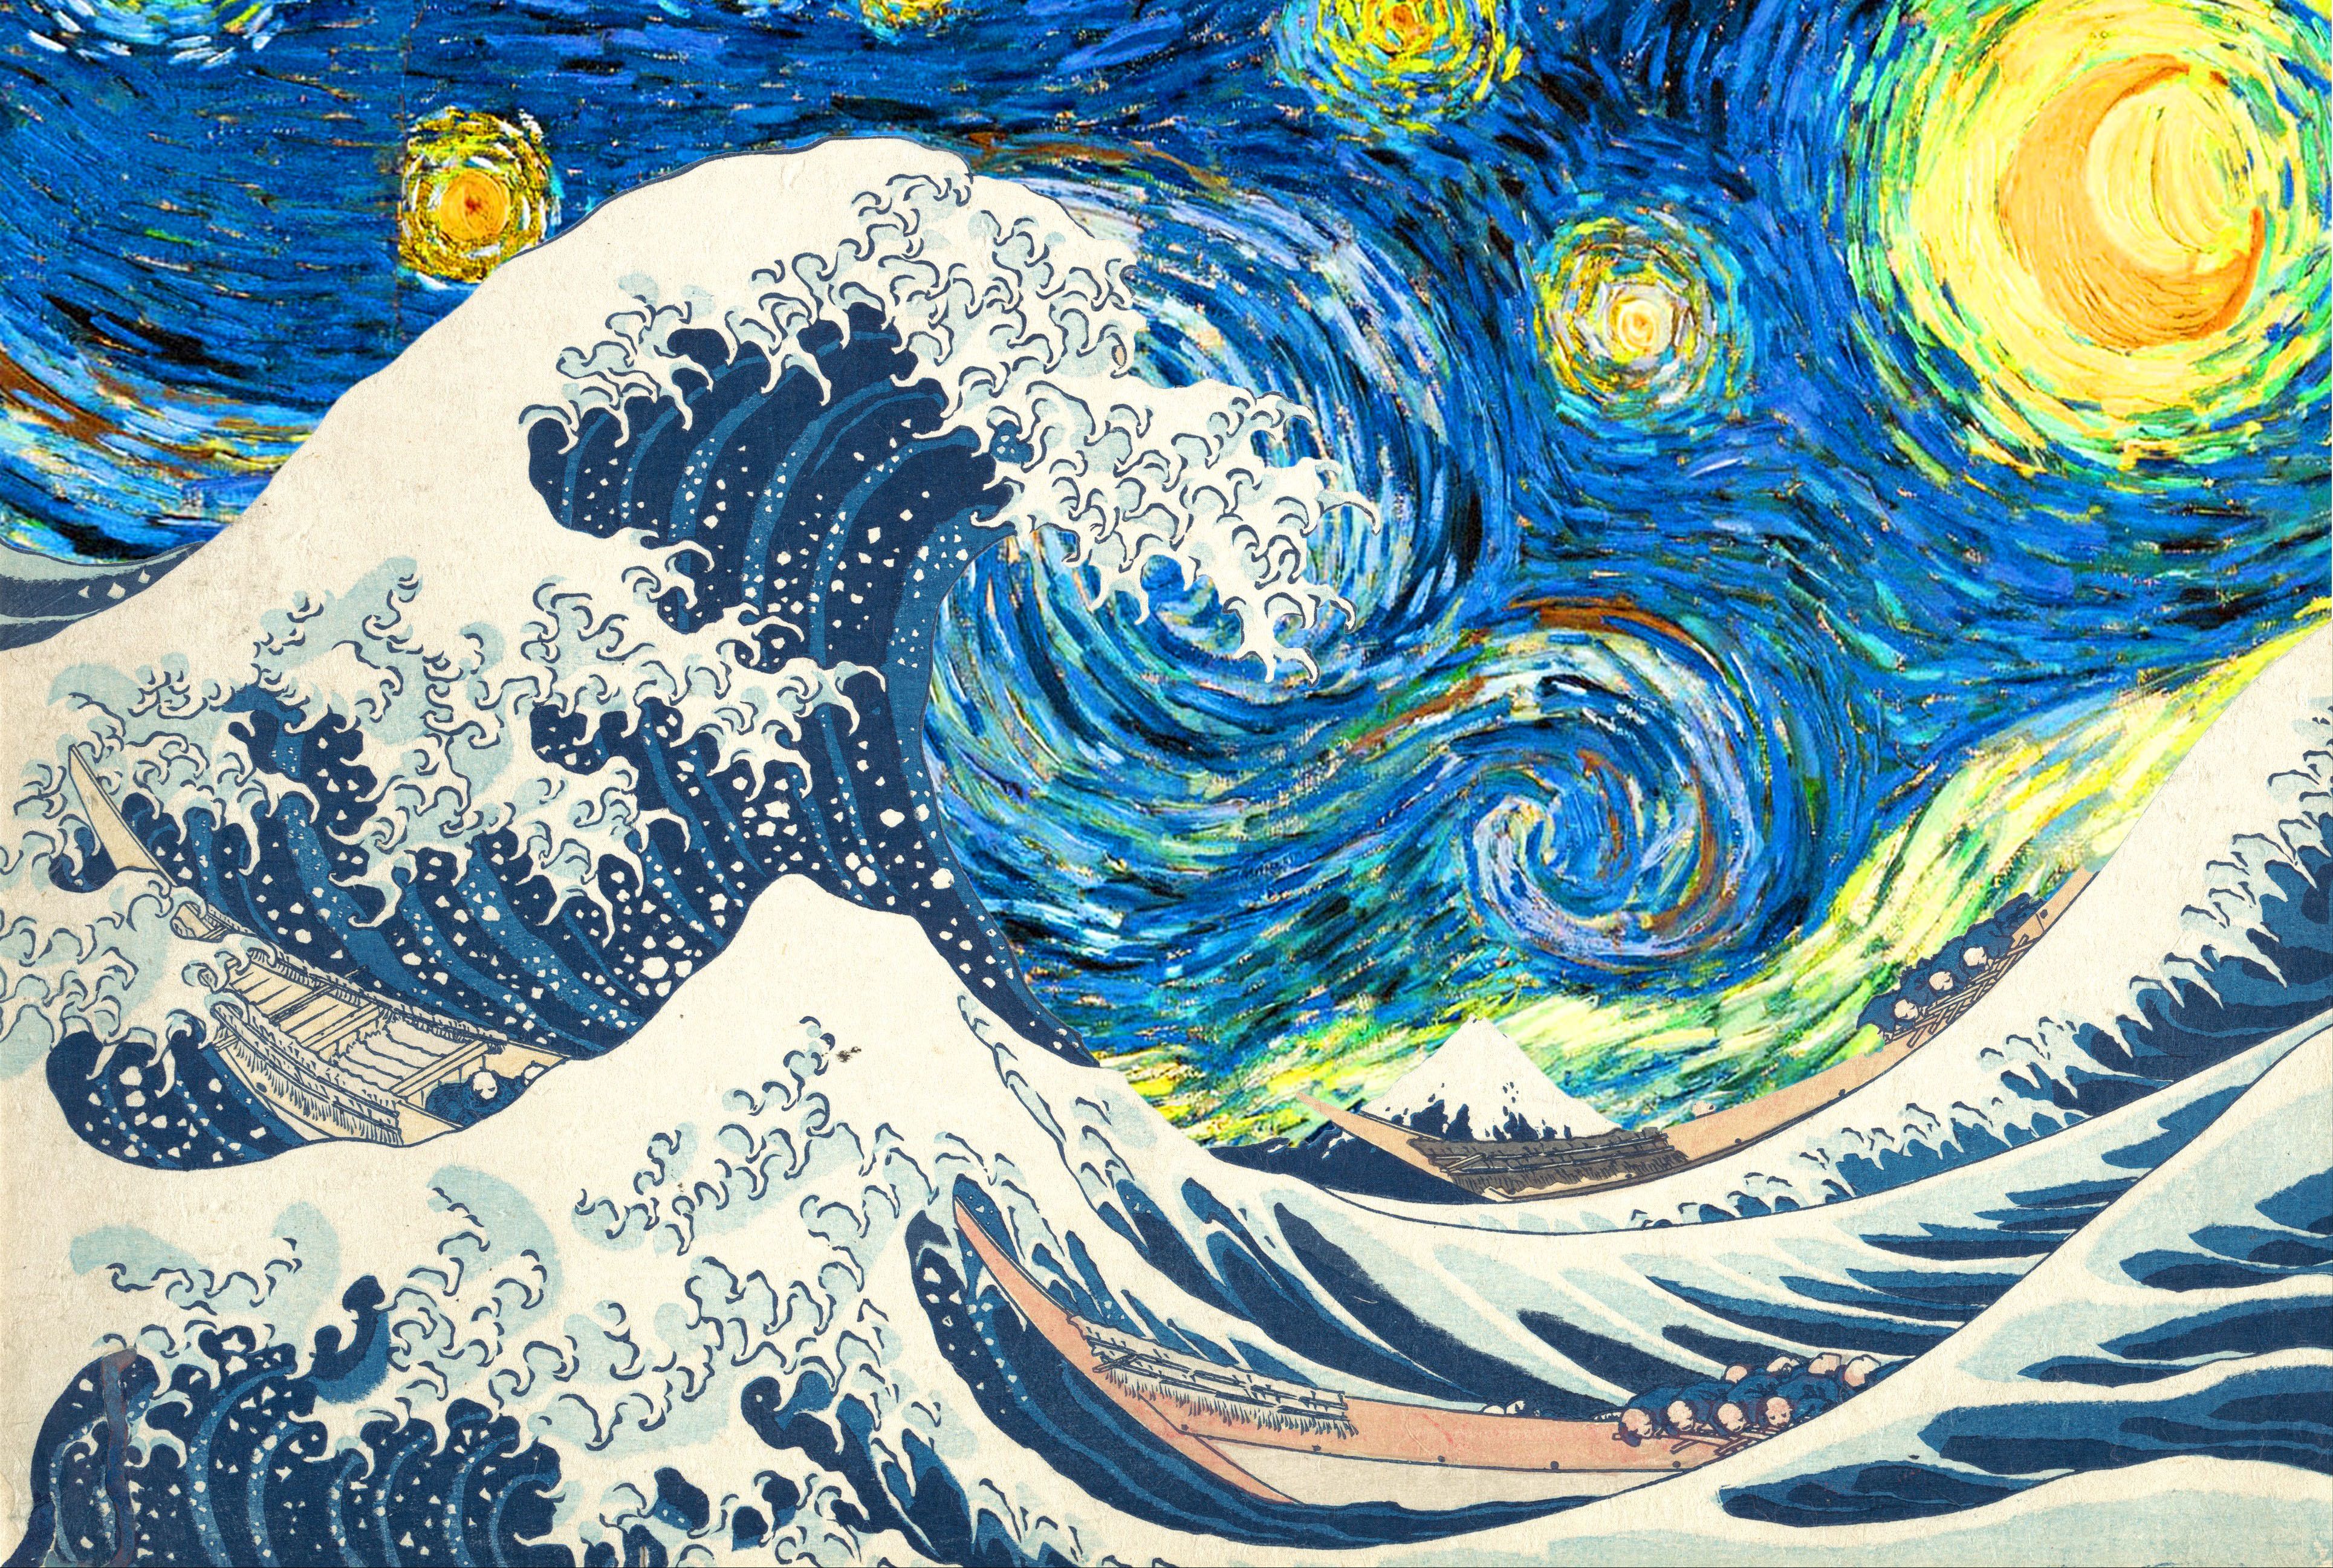 I combined Starry Night with The Great Wave Off Kanagawa